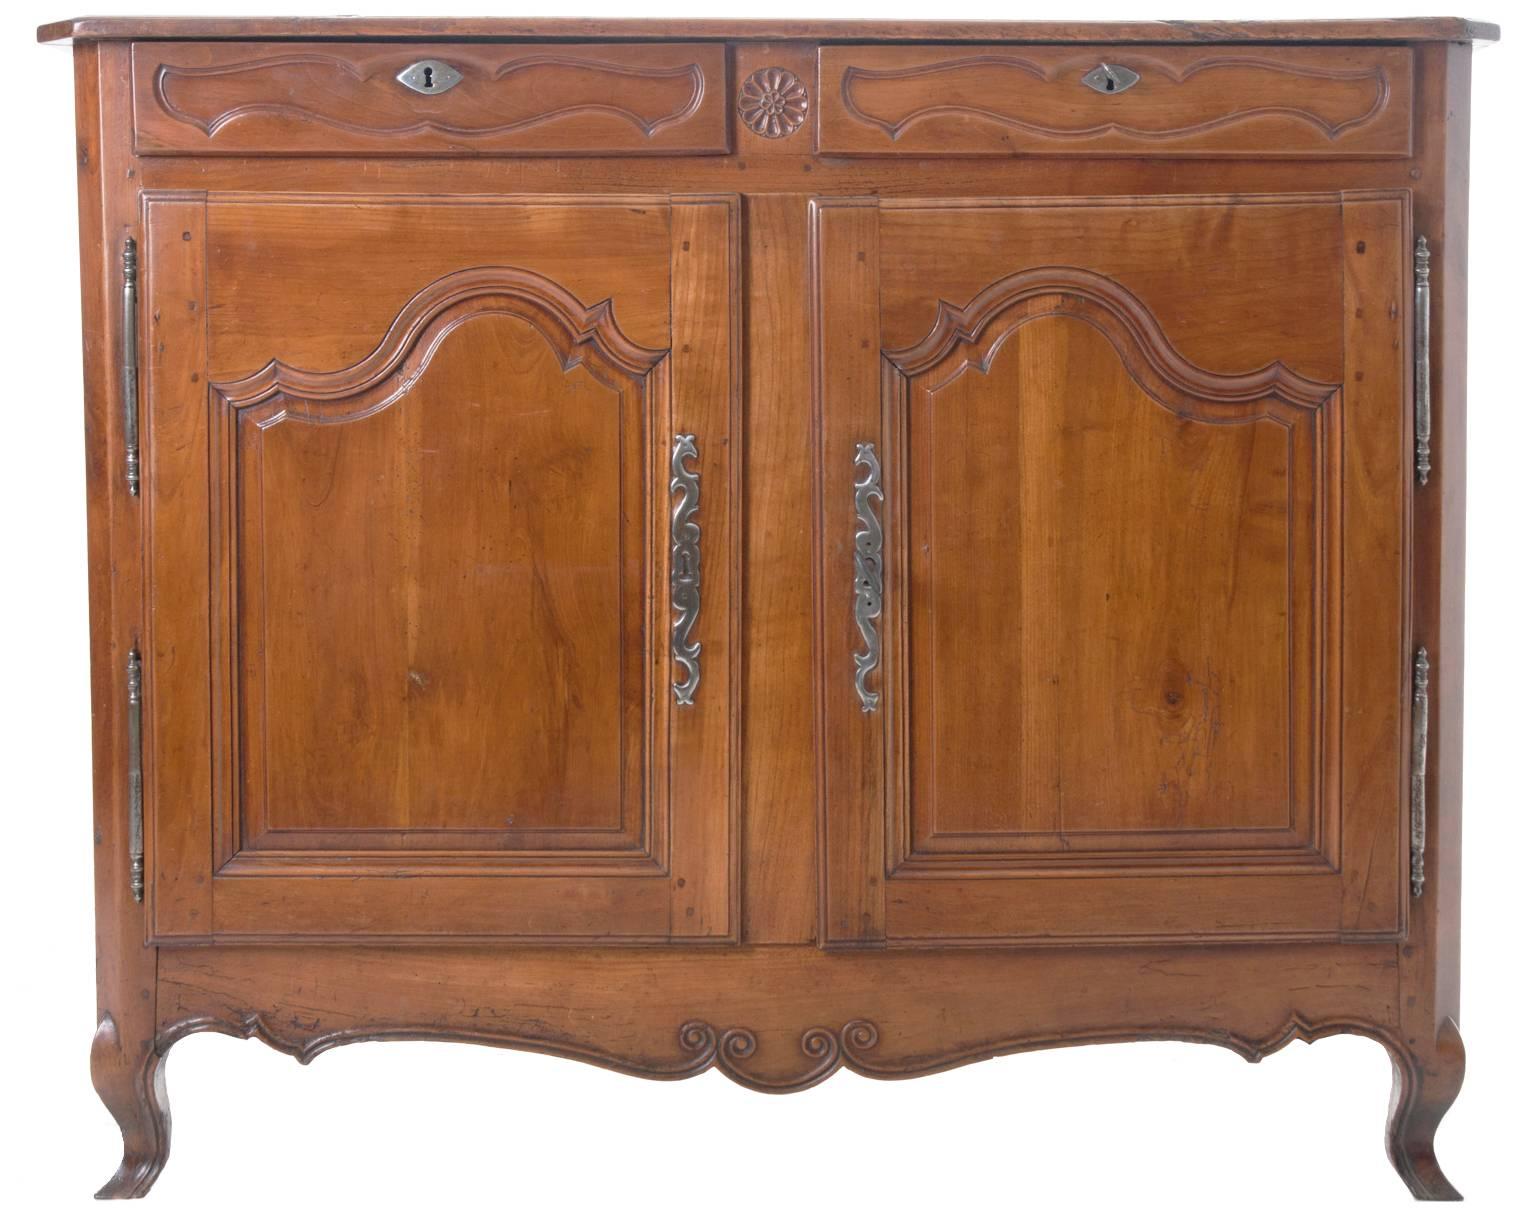 Wonderful French provincial buffet with rich dark cherry patina, you can see it's age in the detail photos all with hand cut escutcheon plates. Carved door fronts give movement to the buffet and compliment the playfully scalloped apron and cabriole